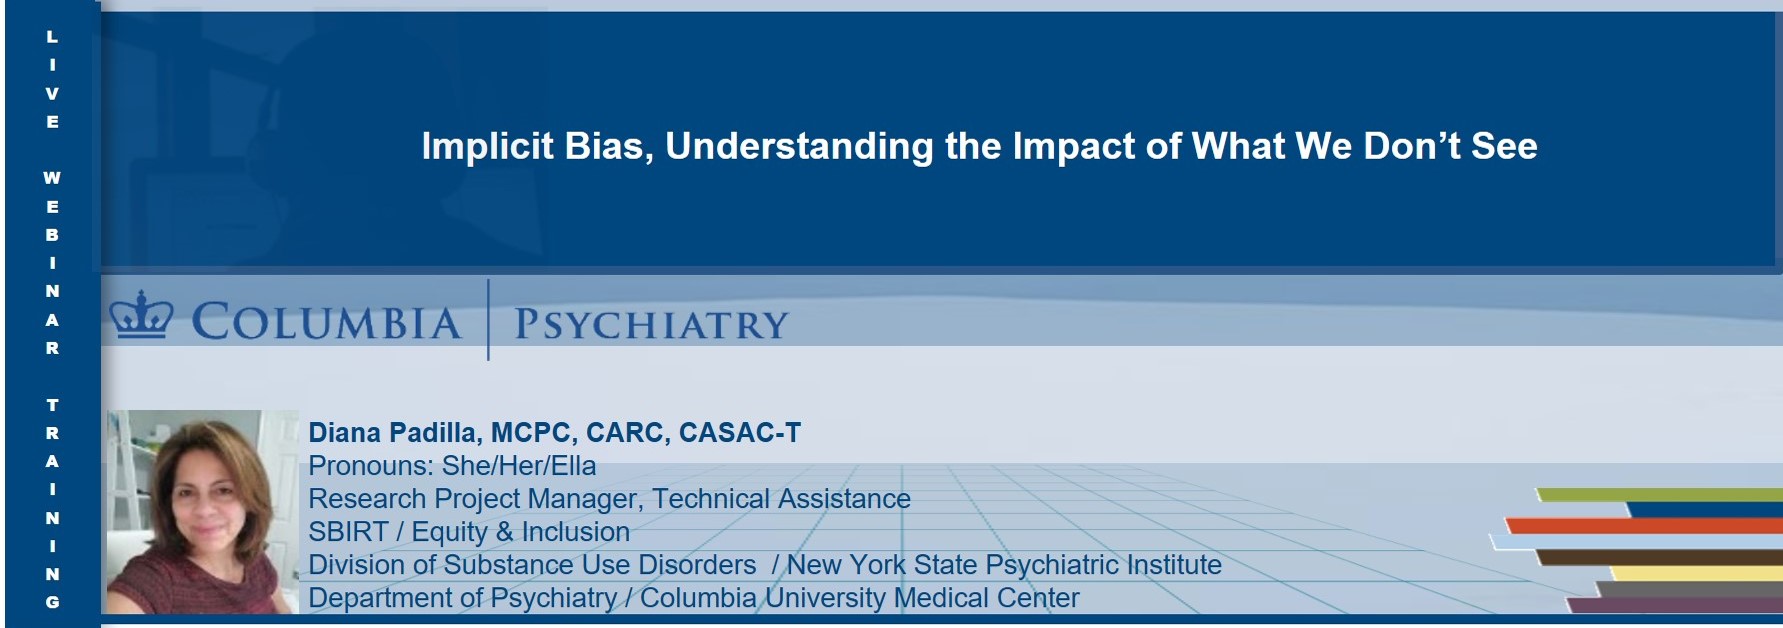 Implicit Bias, Understanding the Impact of What We Don't See